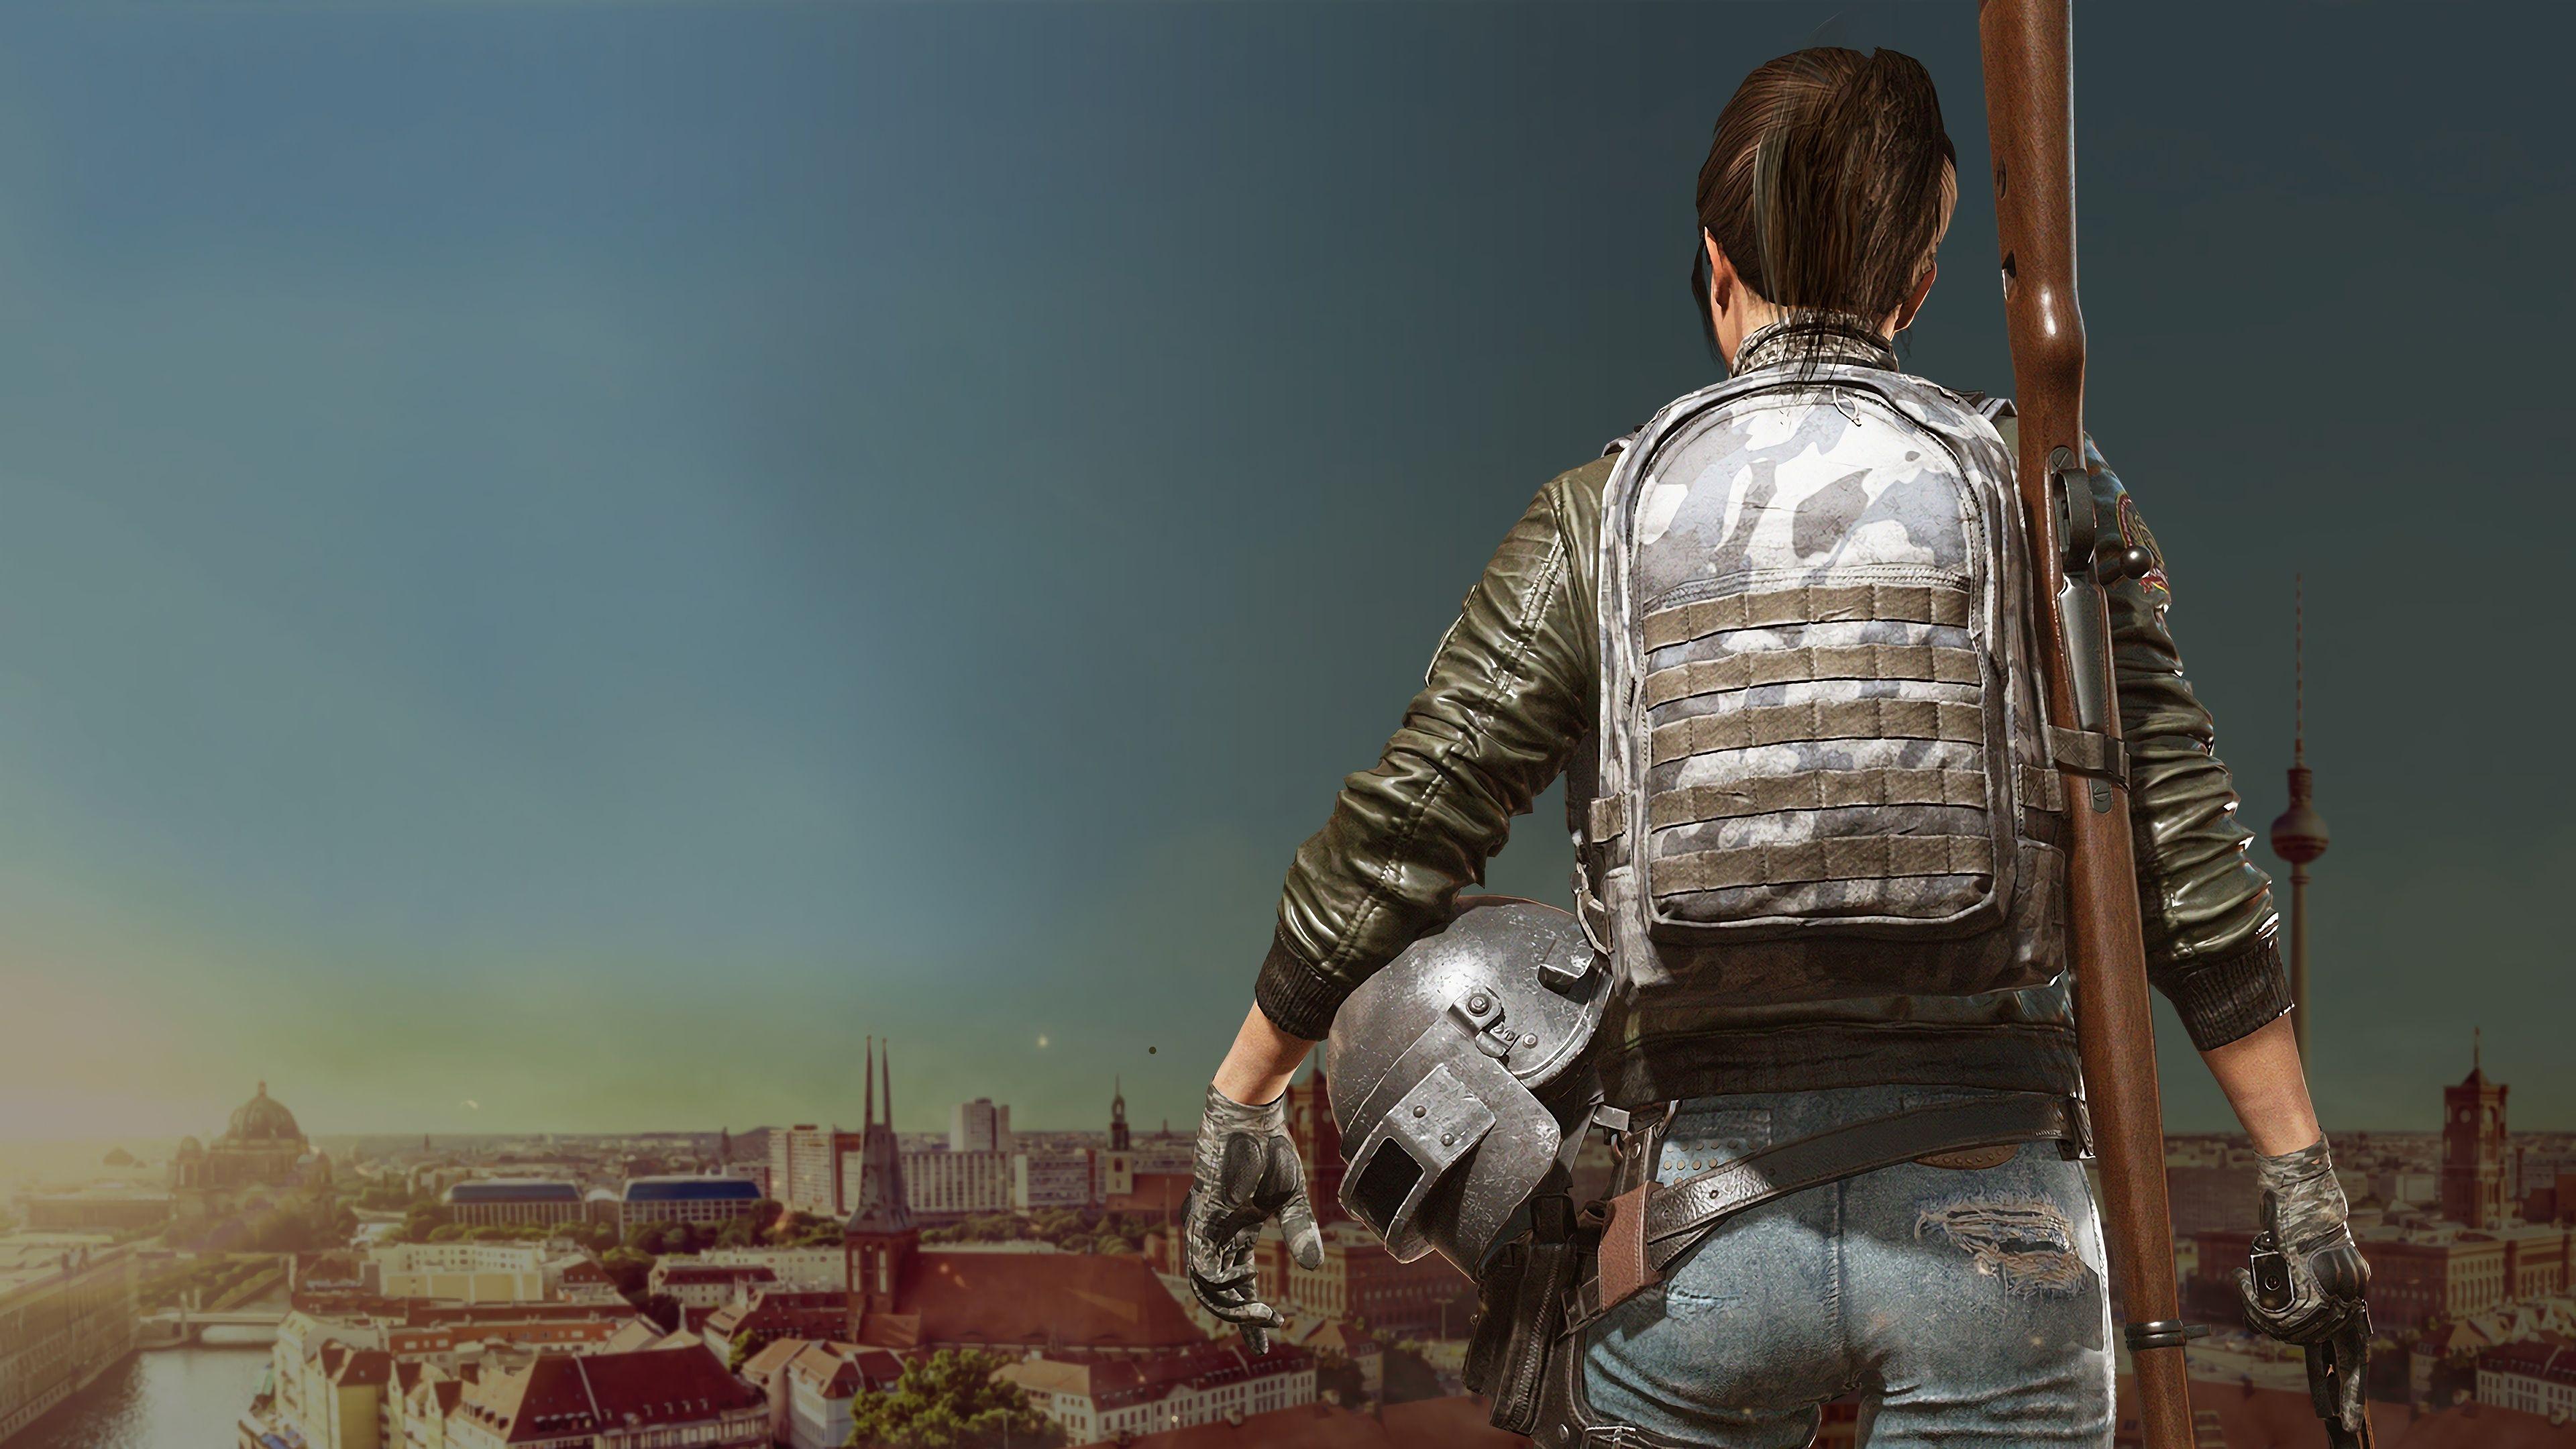 Player Unknown's Battlegrounds (PUBG) 4K girl Pubg wallpaper phone, pubg wallpaper iphone, pubg wal. Wallpaper pc, 4k wallpaper for mobile, Cool wallpaper for pc